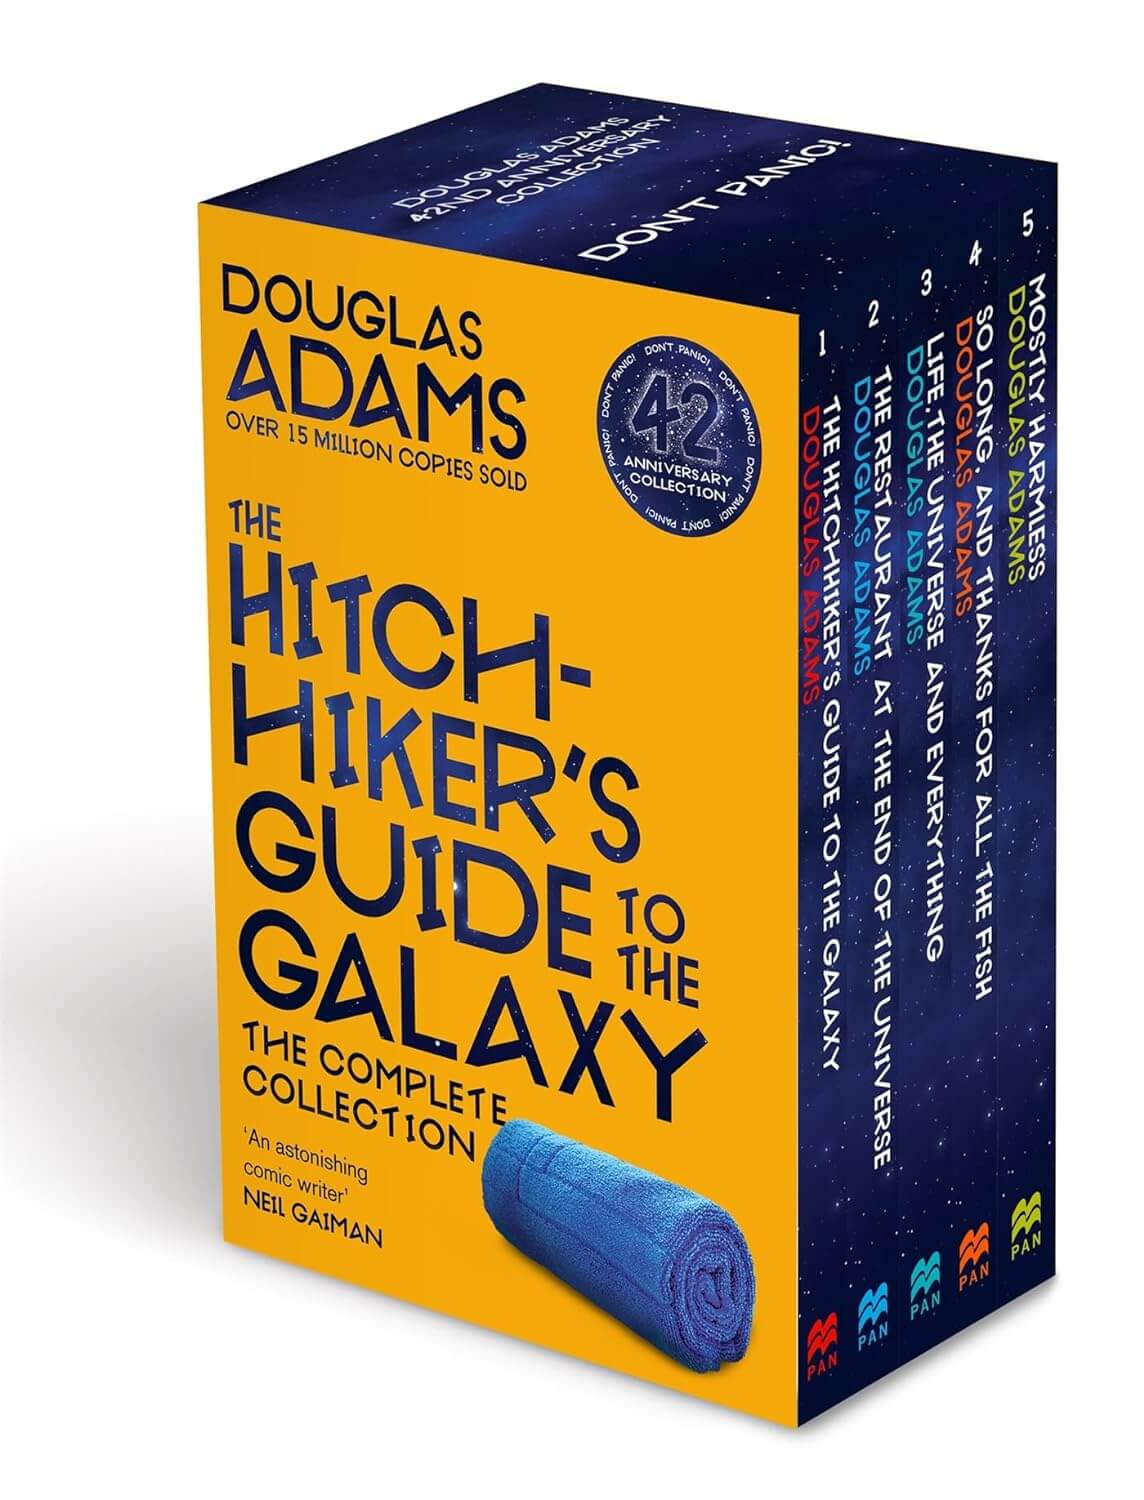  "The Hitchhiker's Guide to the Galaxy" by Douglas Adams Complete Collection